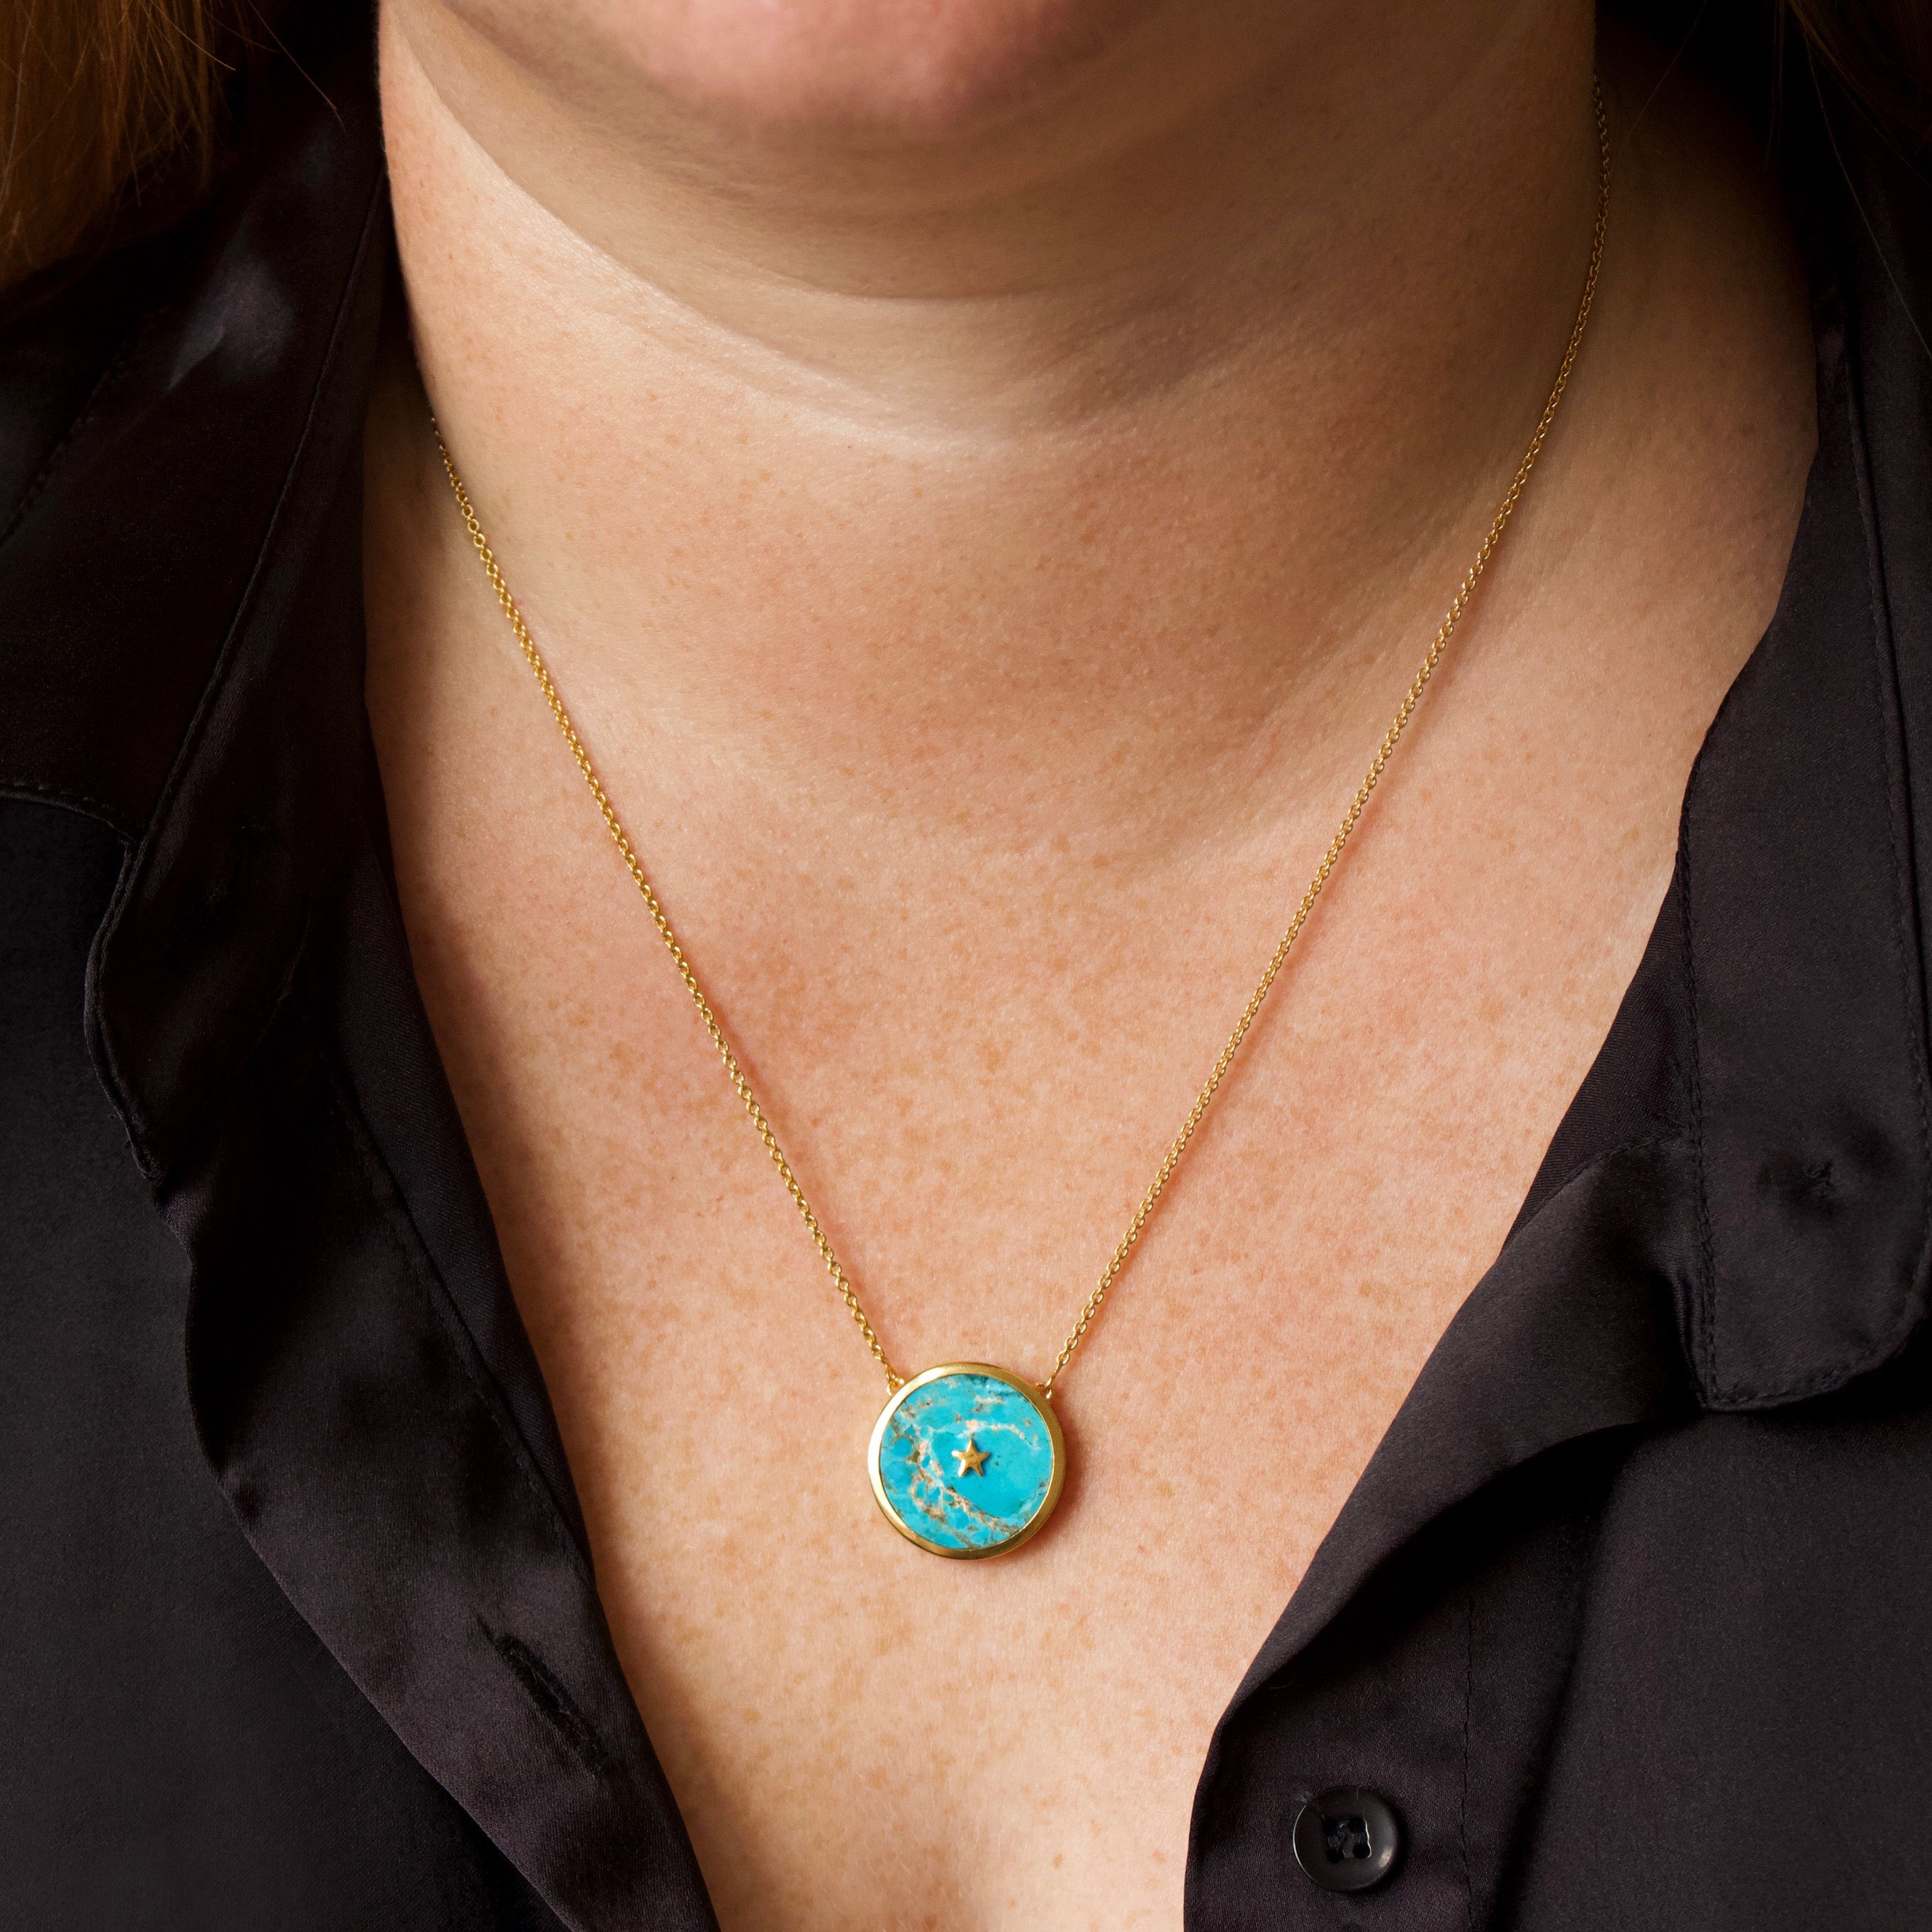 Gorgeous gold vermeil necklaces crafted by Carrie